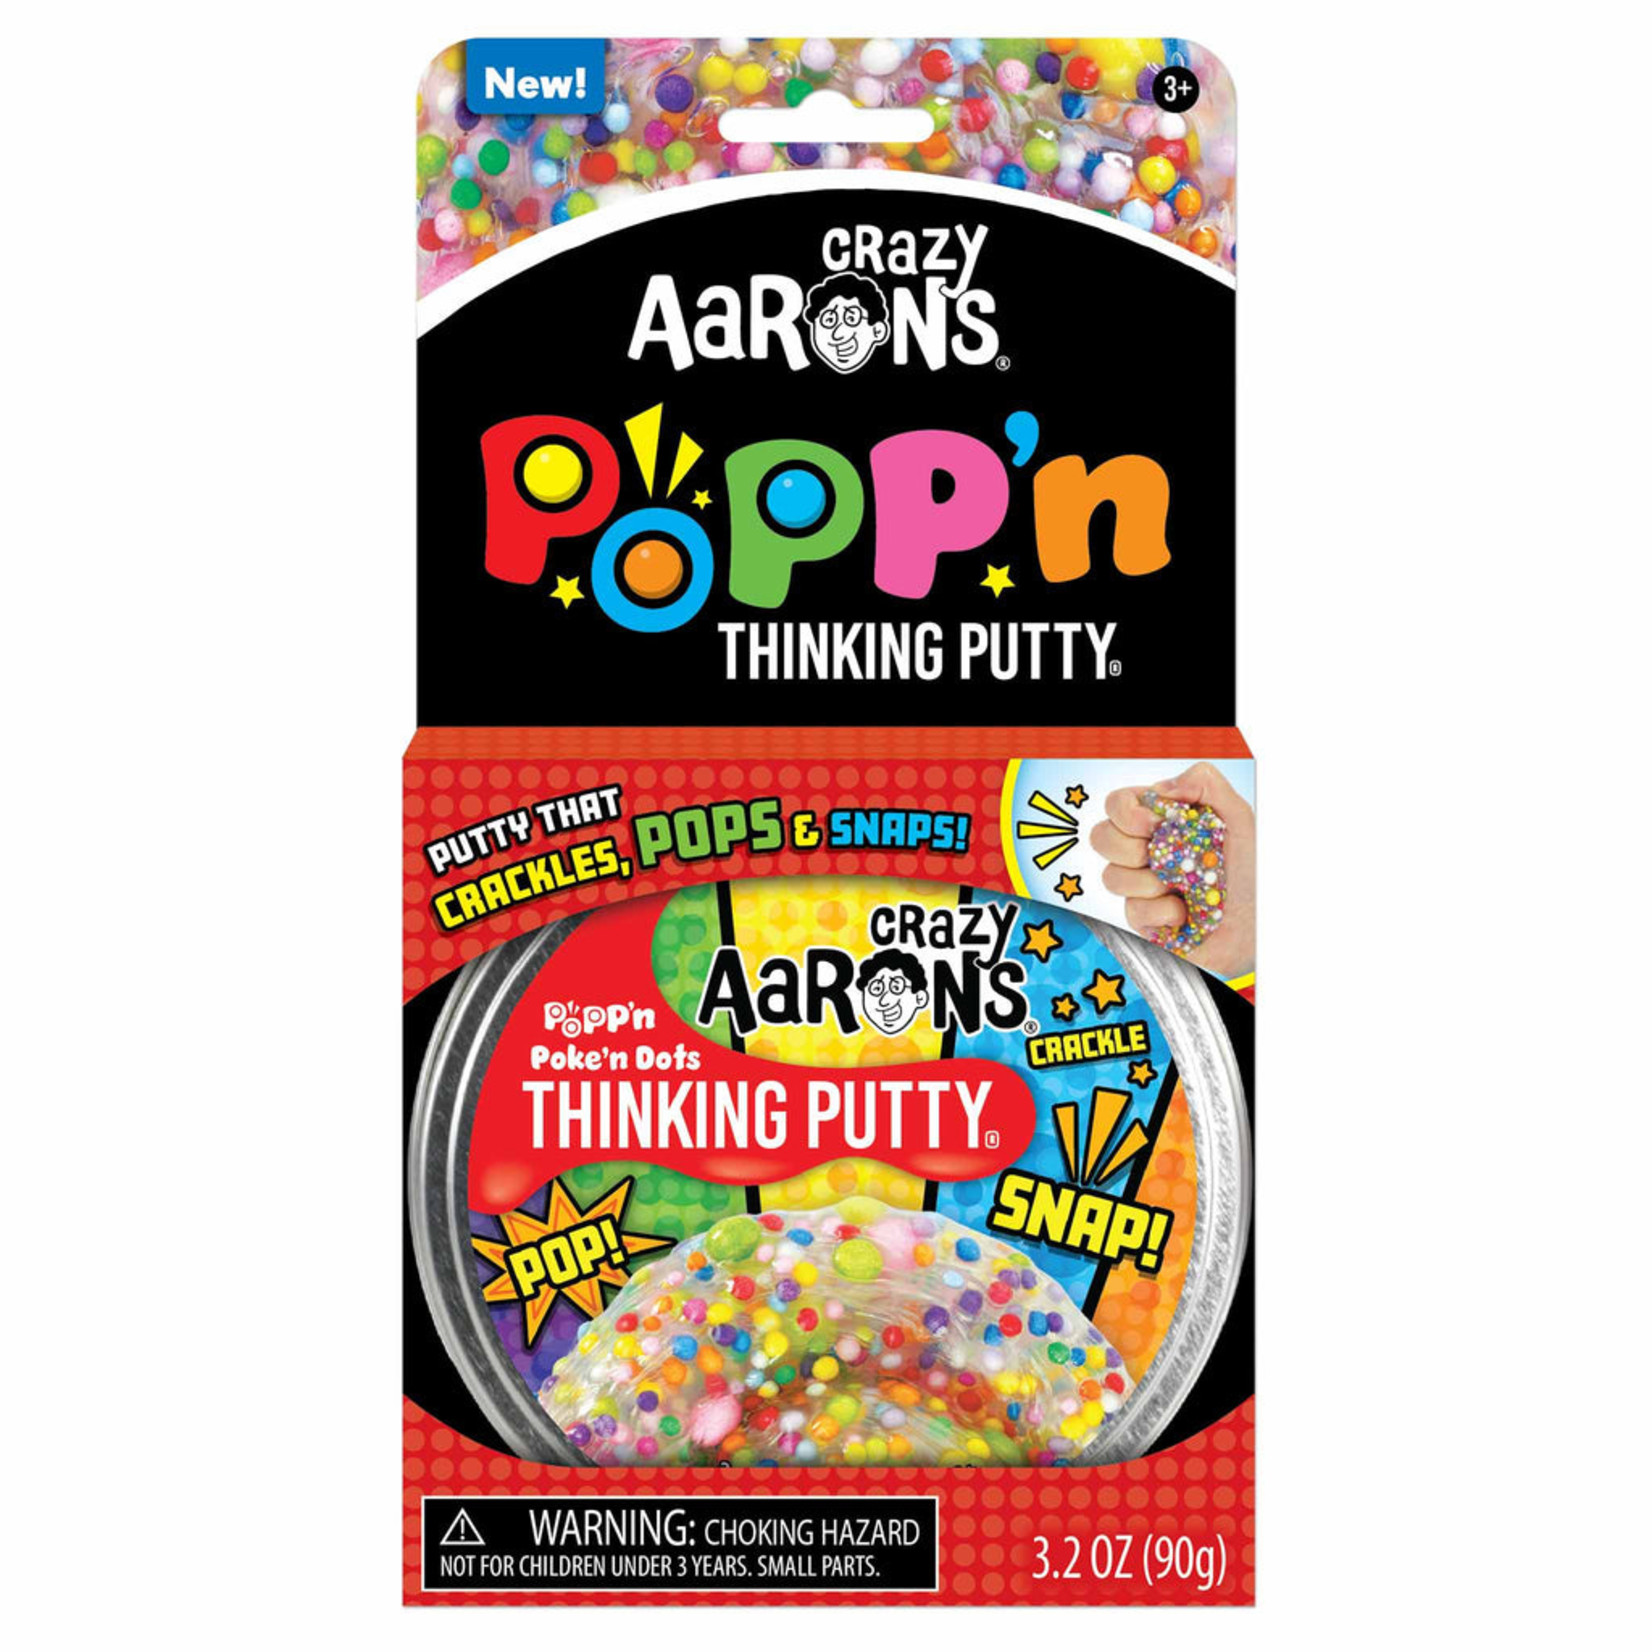 Crazy Aaron's Crazy Aaron's Poke'n Dots - Full Size 4" Thinking Putty Tin